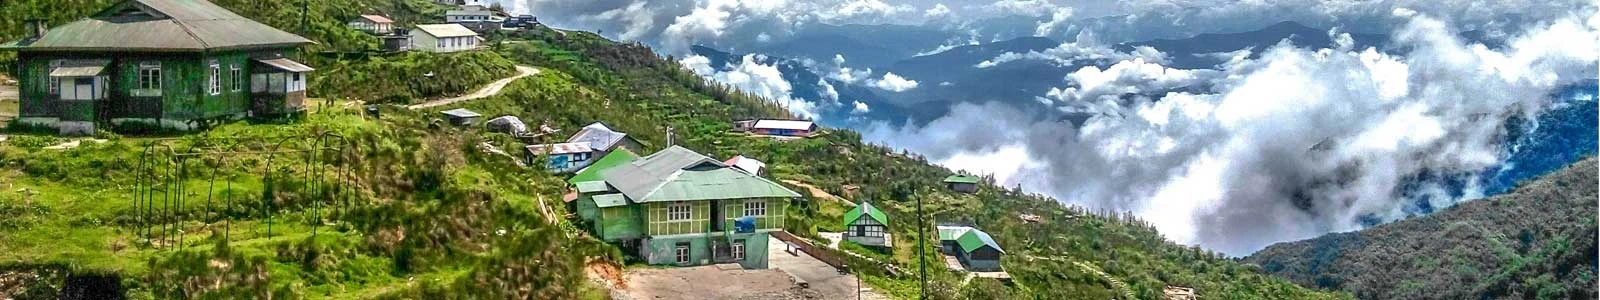 sikkim tour packages from bagdogra